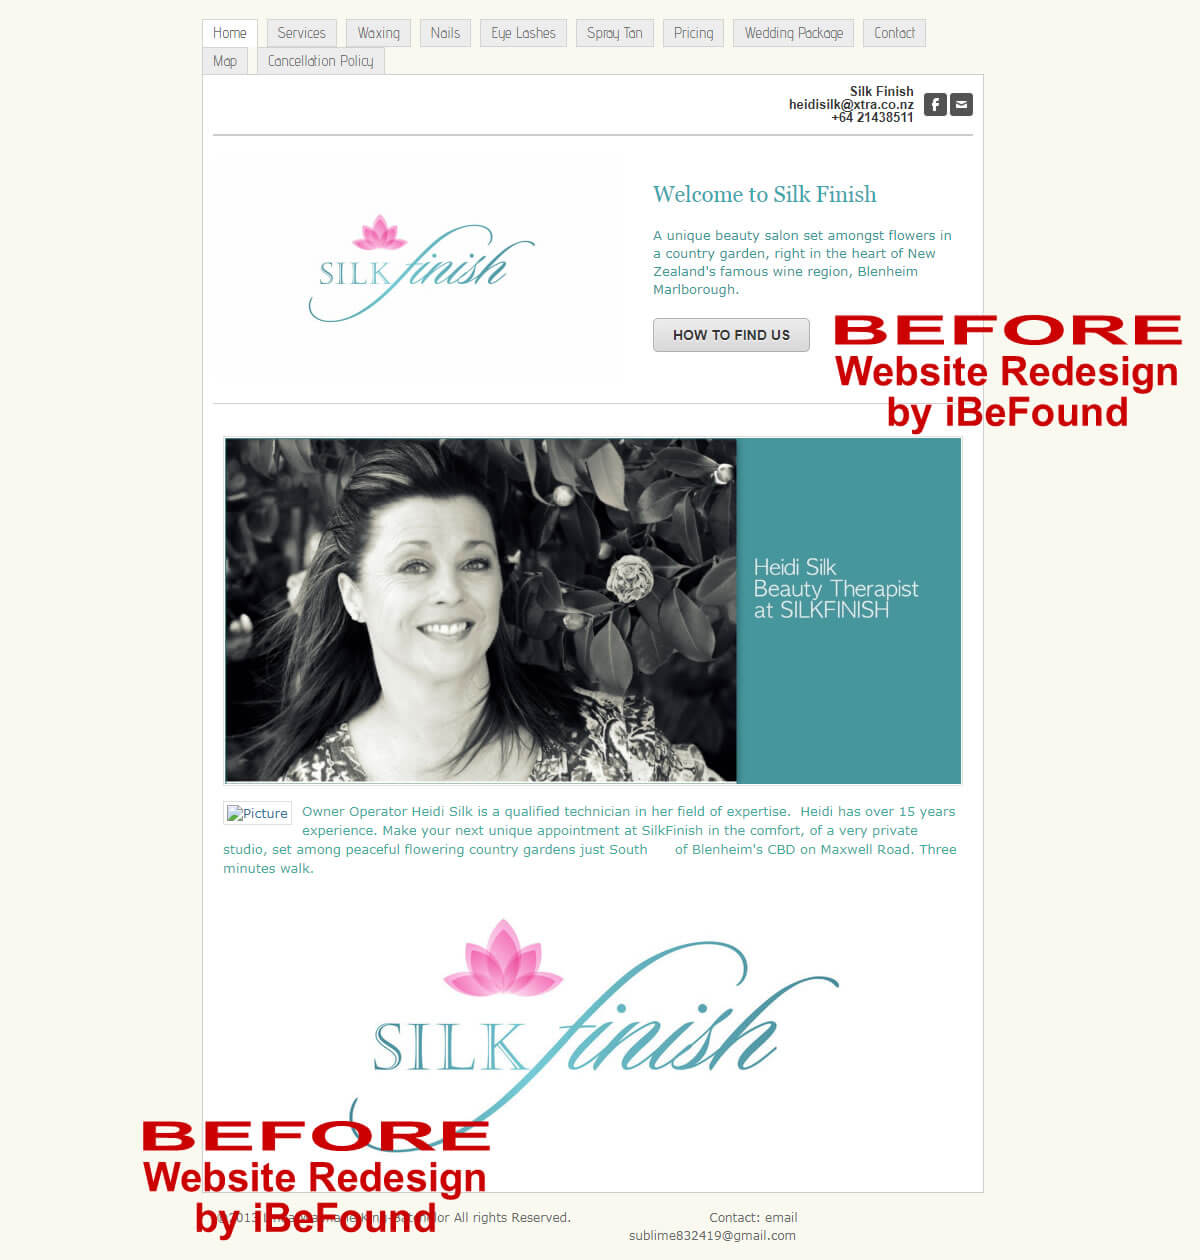 Homepage Of Silk Finish Beauty Salon Before Website Redesign By IBeFound Digital Marketing